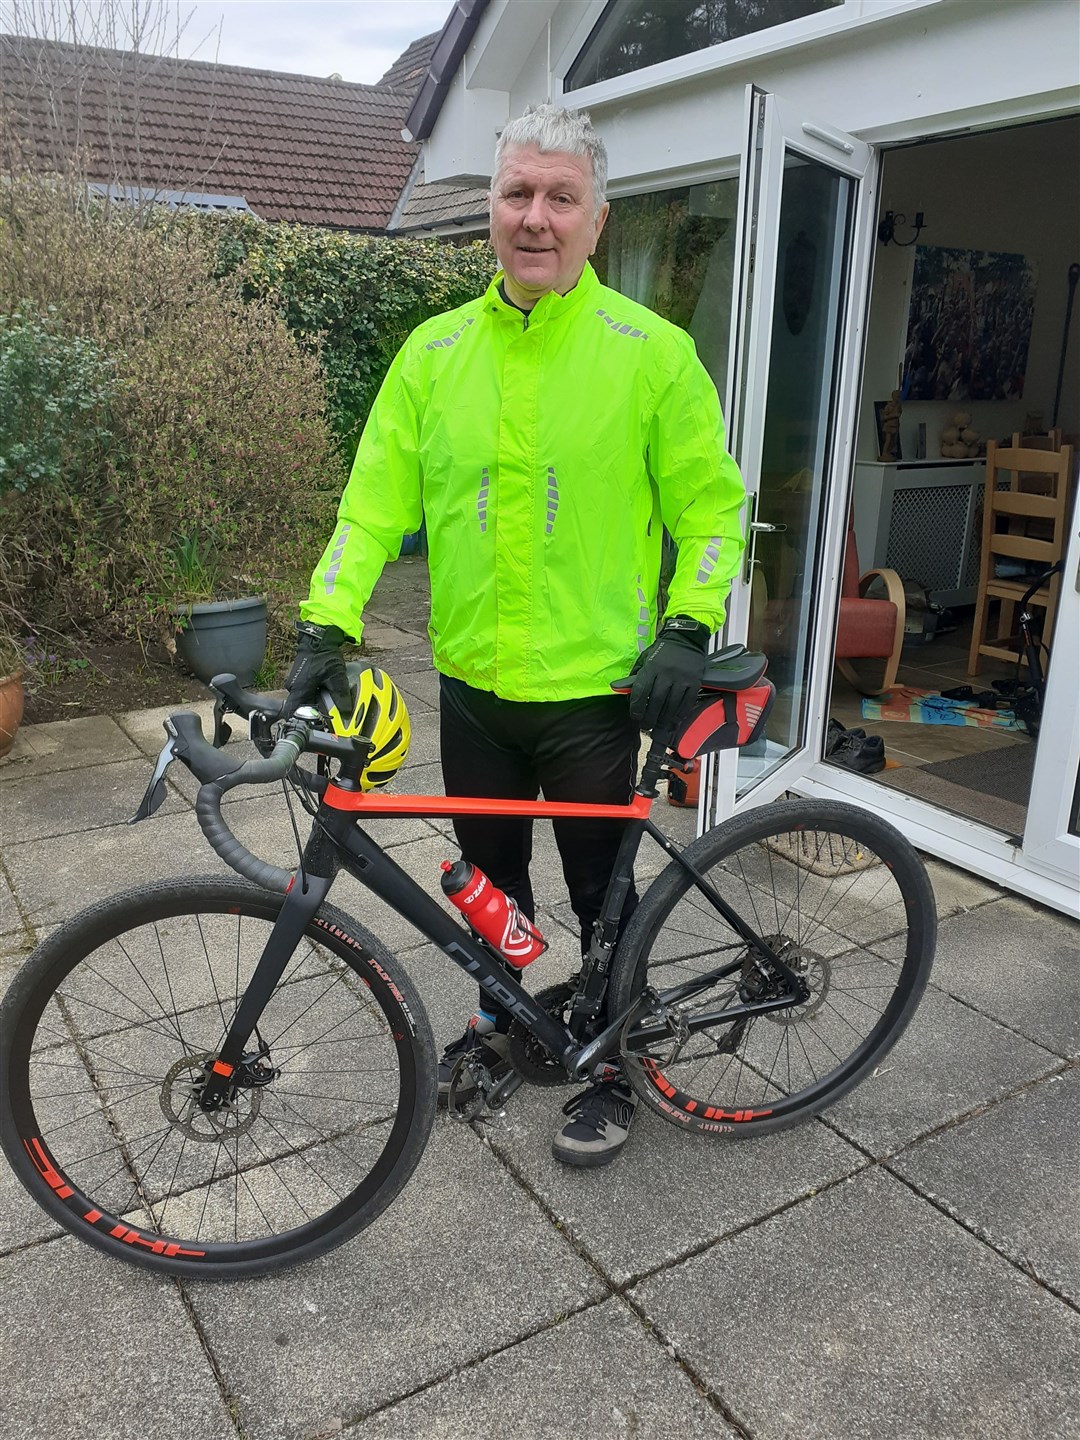 Andy Walker recently tackled more than 80 miles to help victims of crime in Malawi.